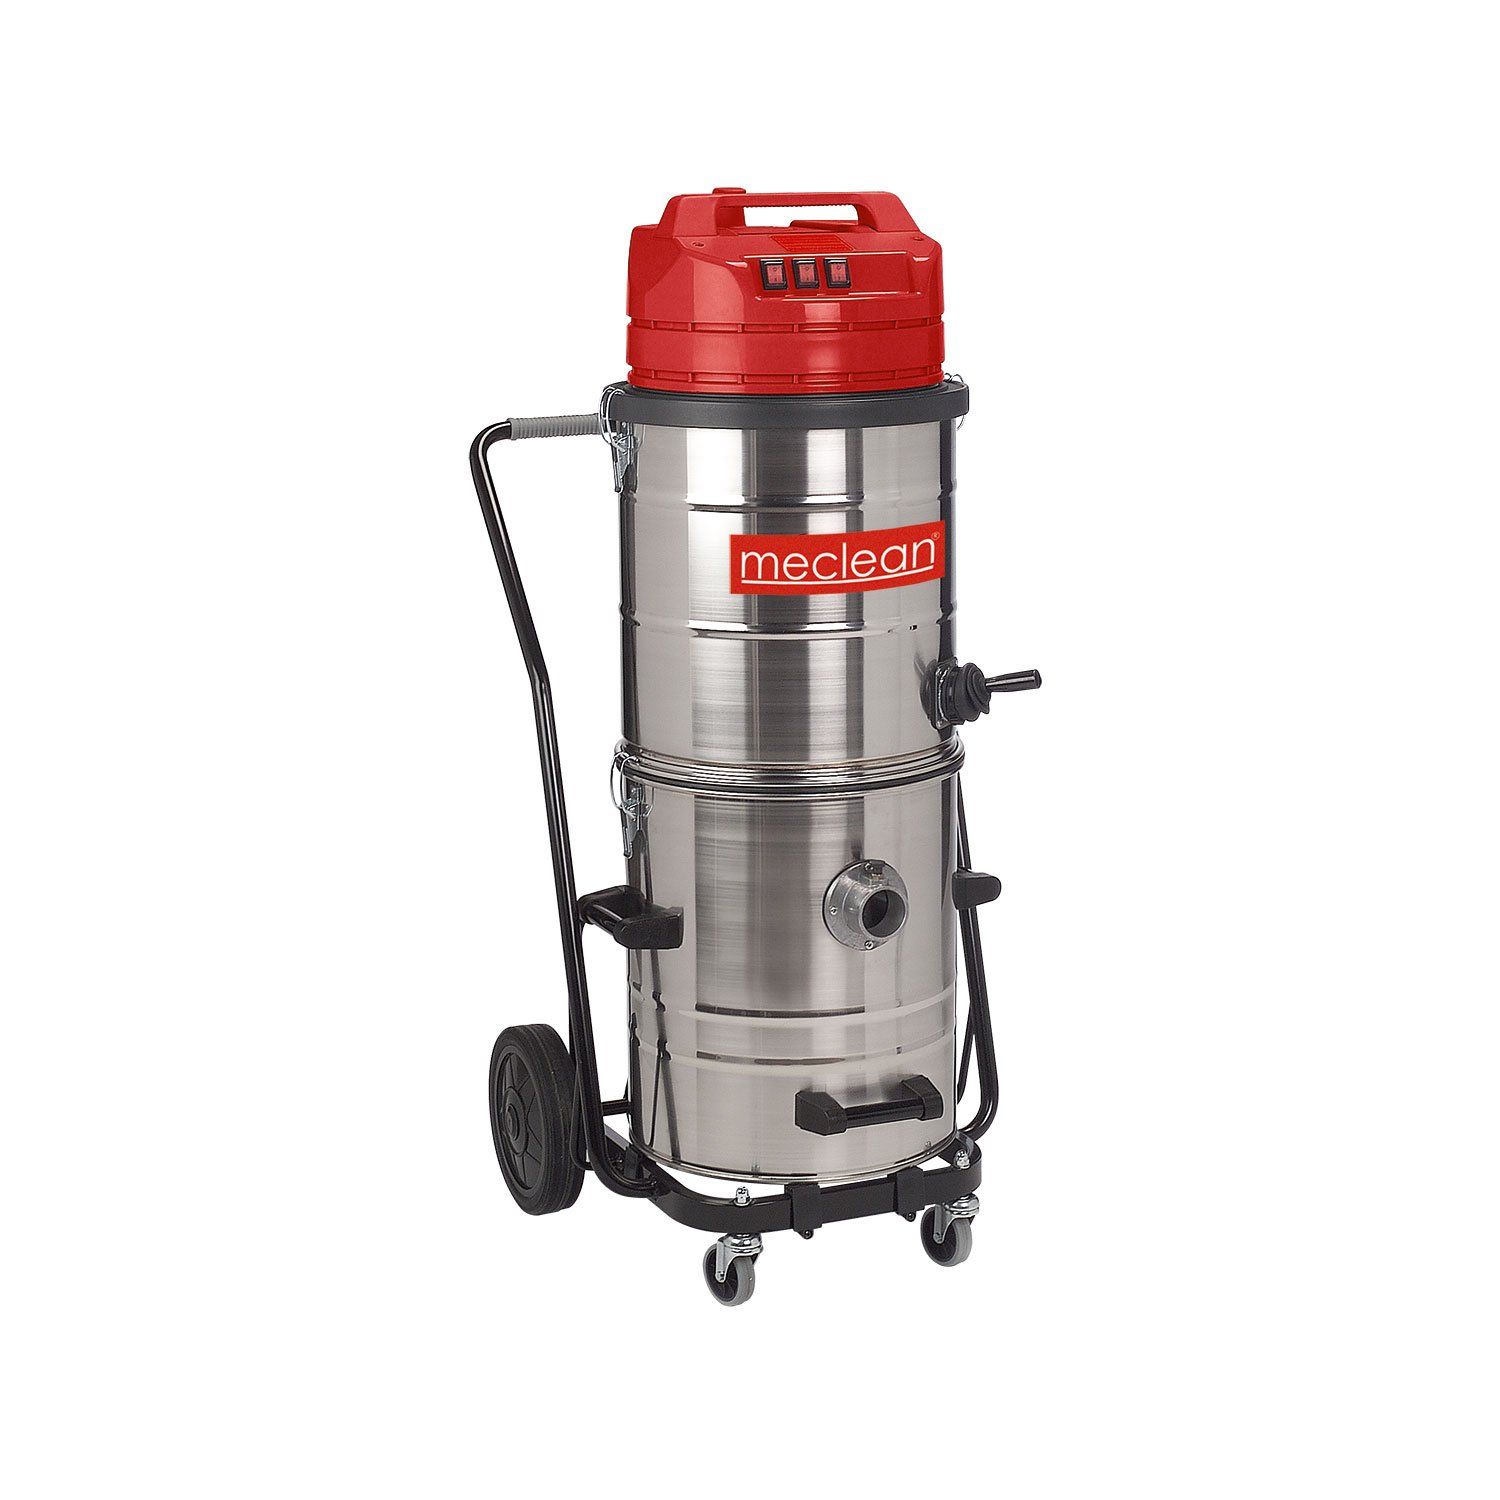 Meclean professional industrial vacuum cleaner Crafter 600